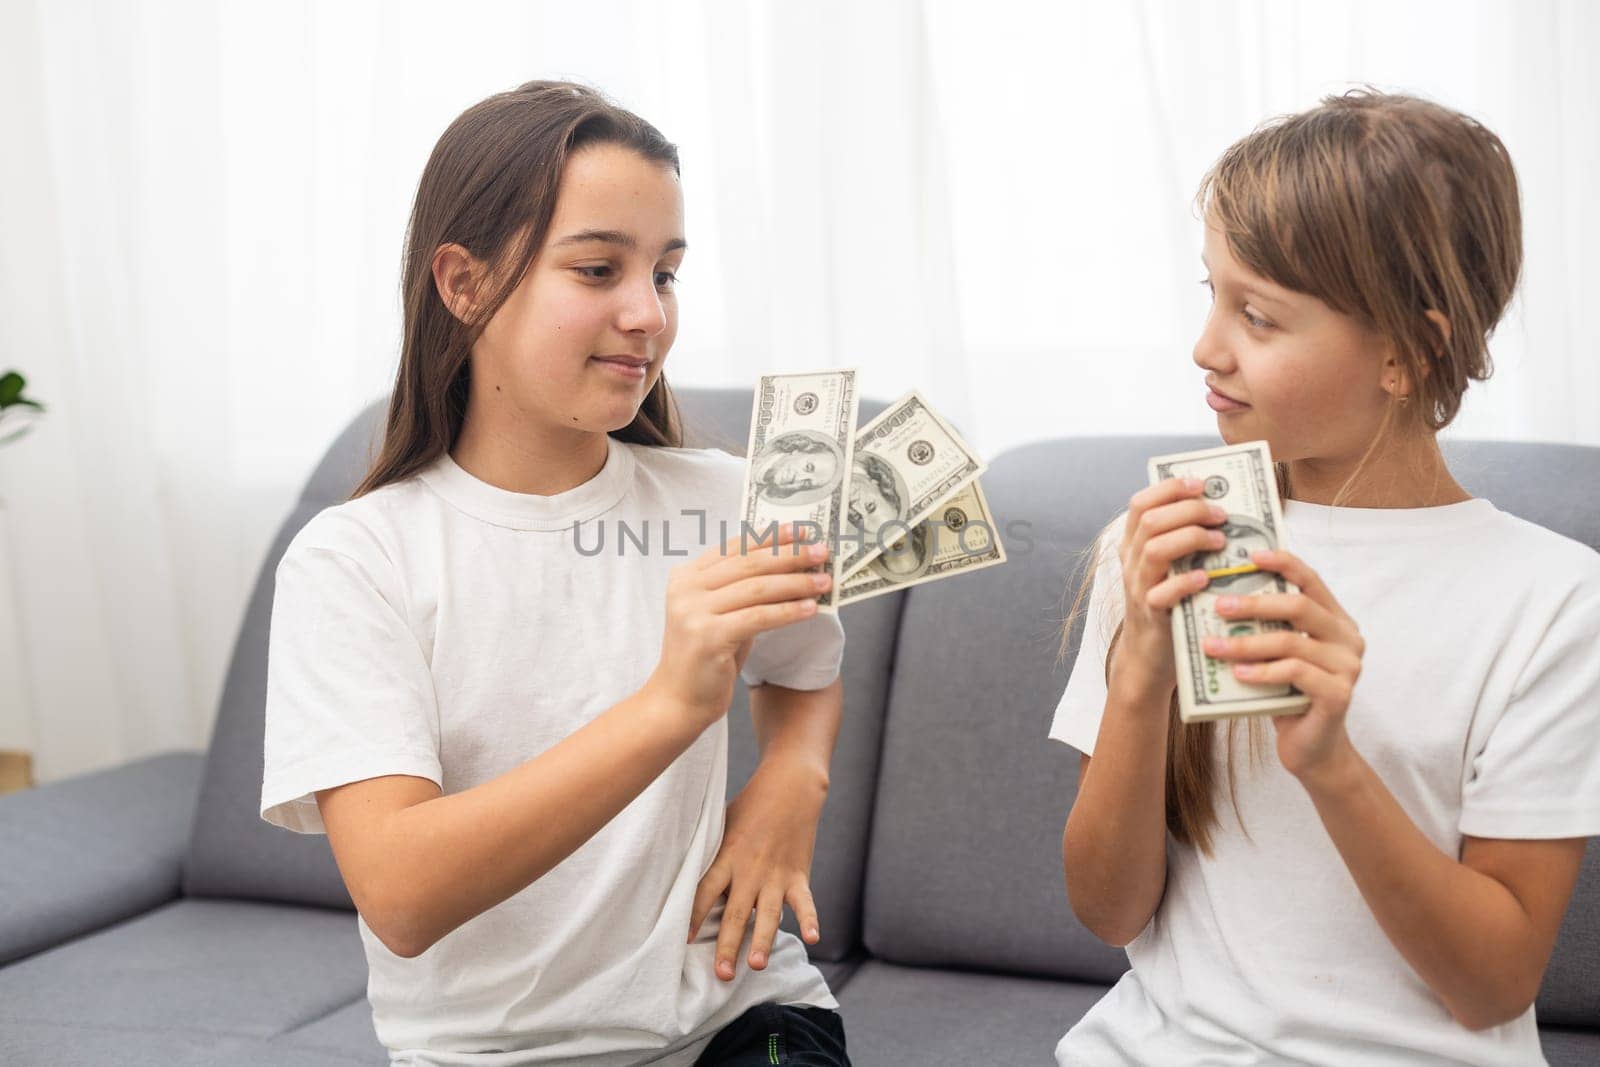 Portrait of two business children with US Dollars as symbol of bribe in an envelope. High quality photo